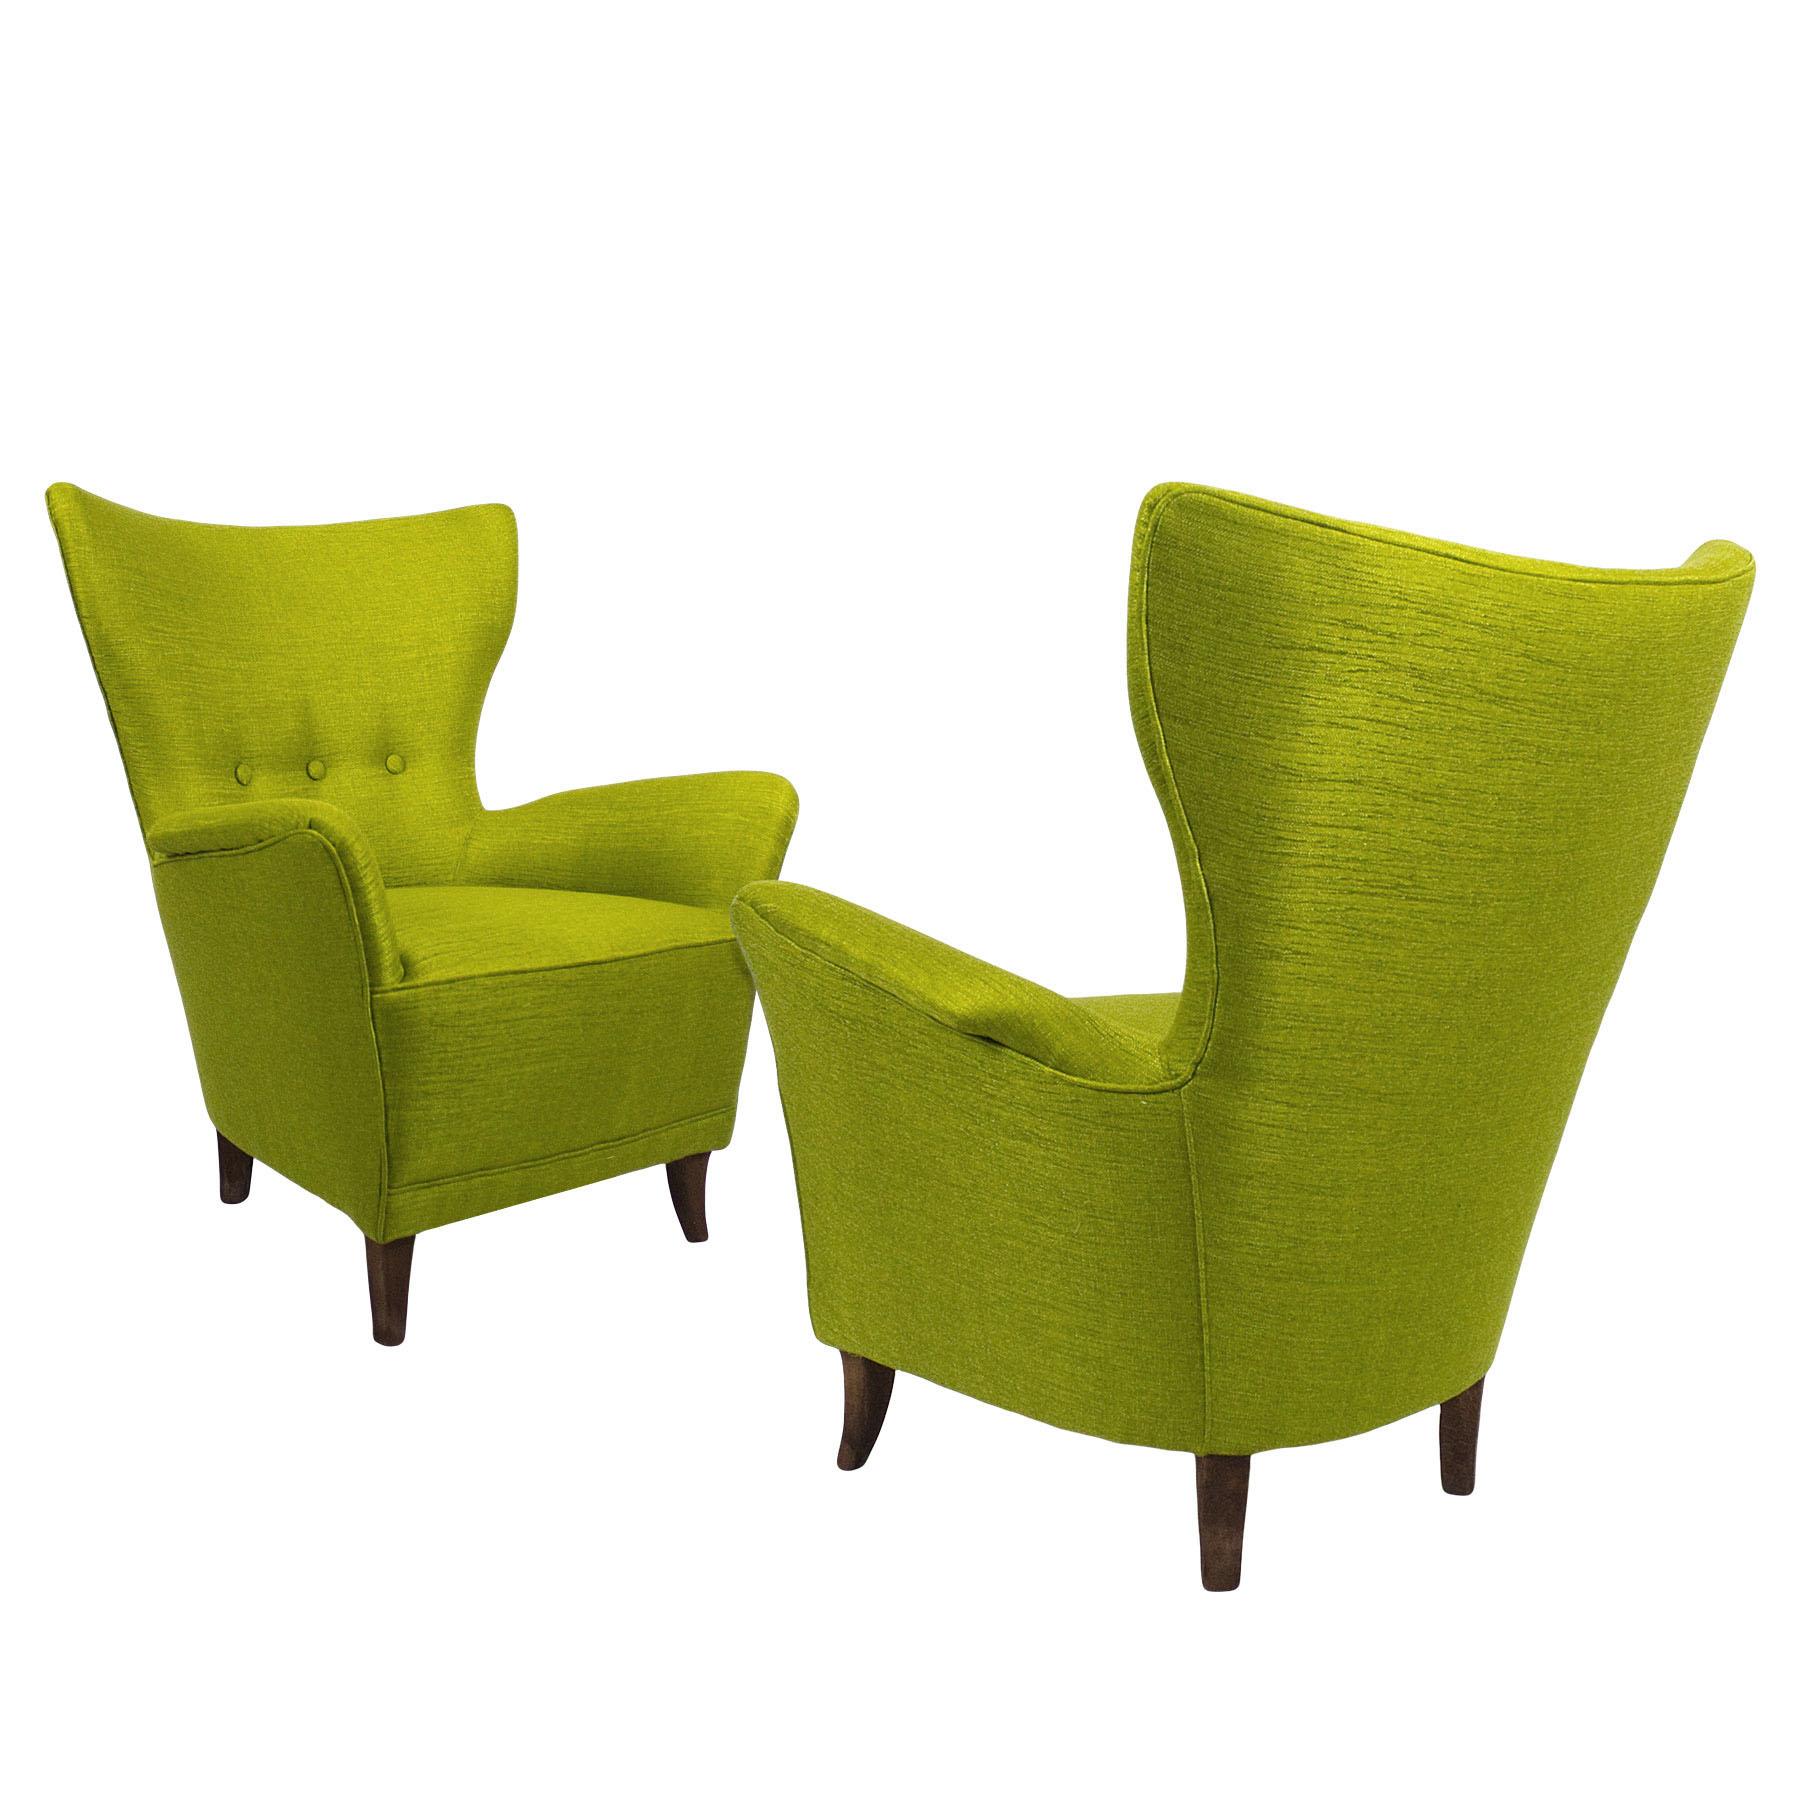 1940s Pair of Flared Back Armchairs, Wood, Anise Green Fabric, Italy